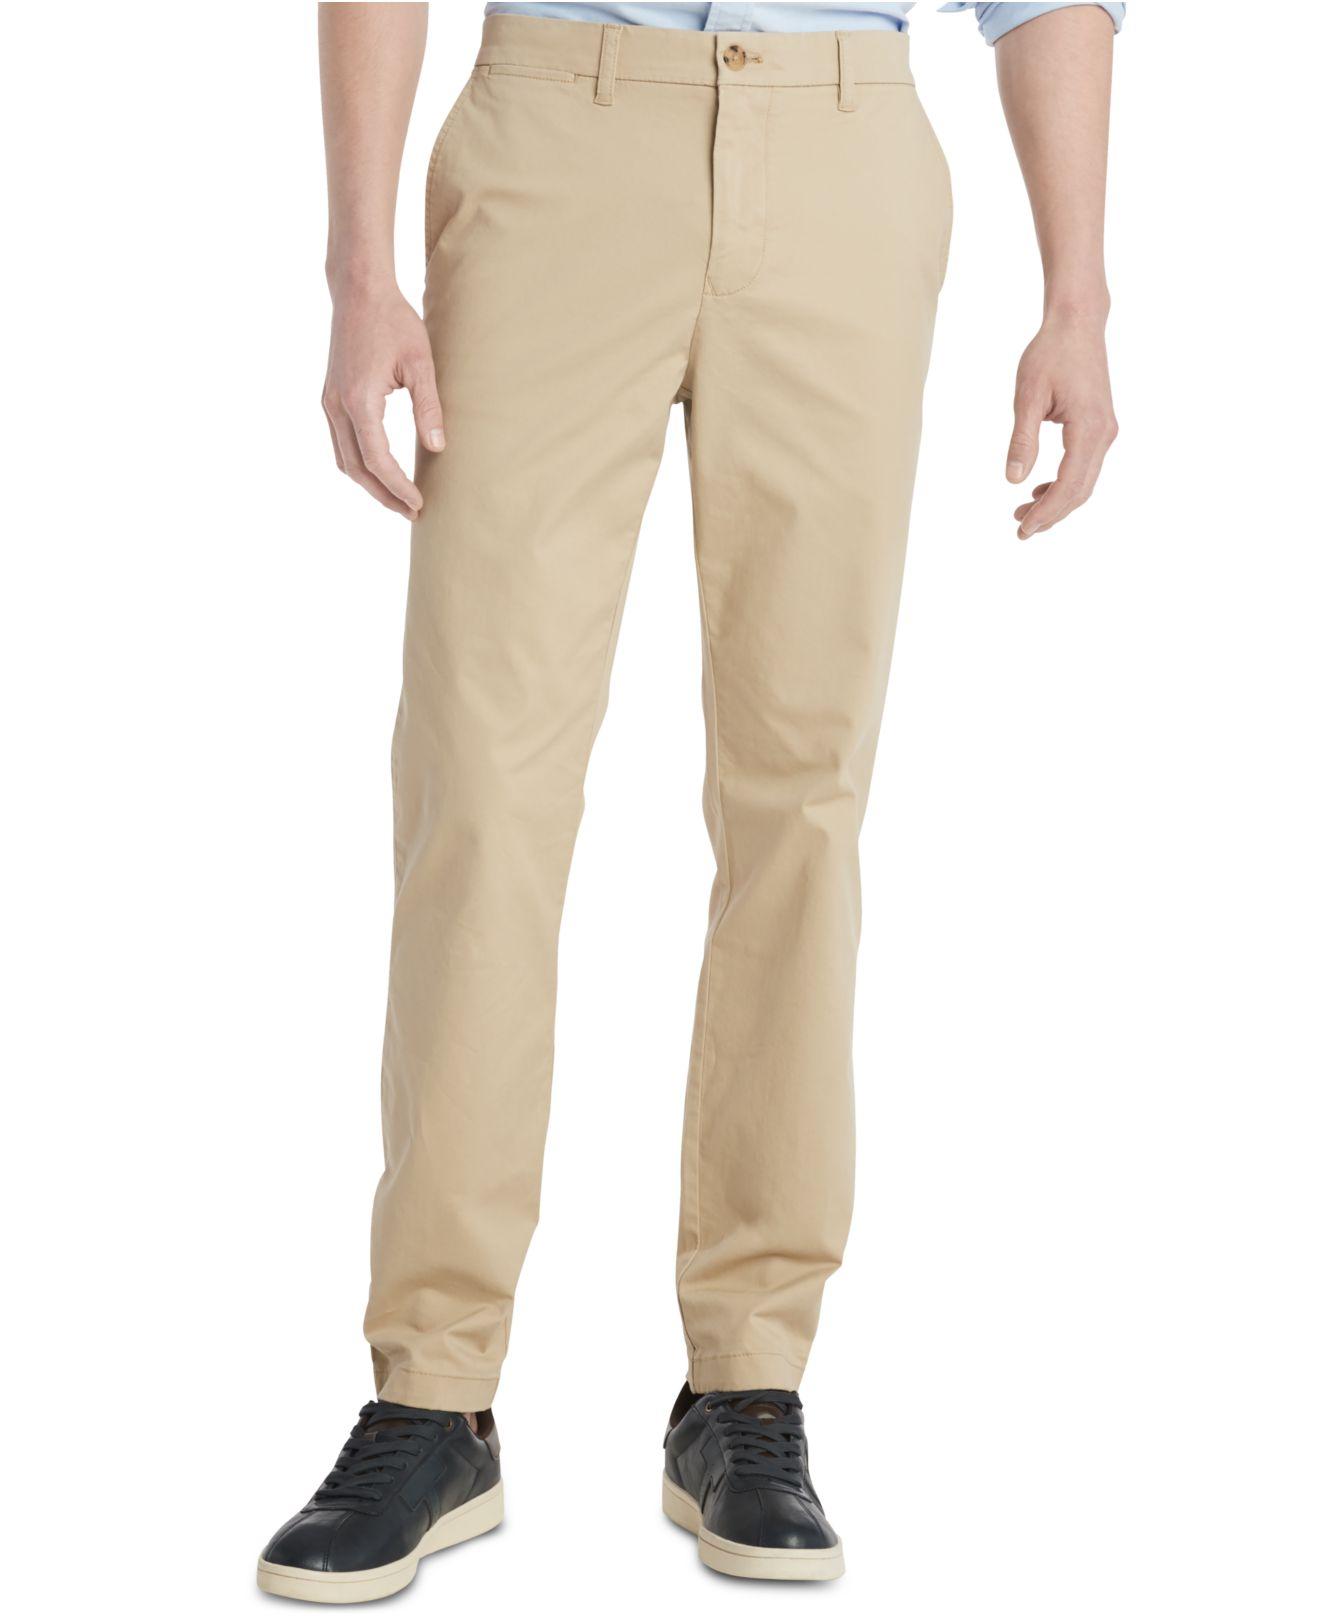 Tommy Hilfiger Th Flex Stretch Slim-fit Chino Pants, Created For Macy's ...